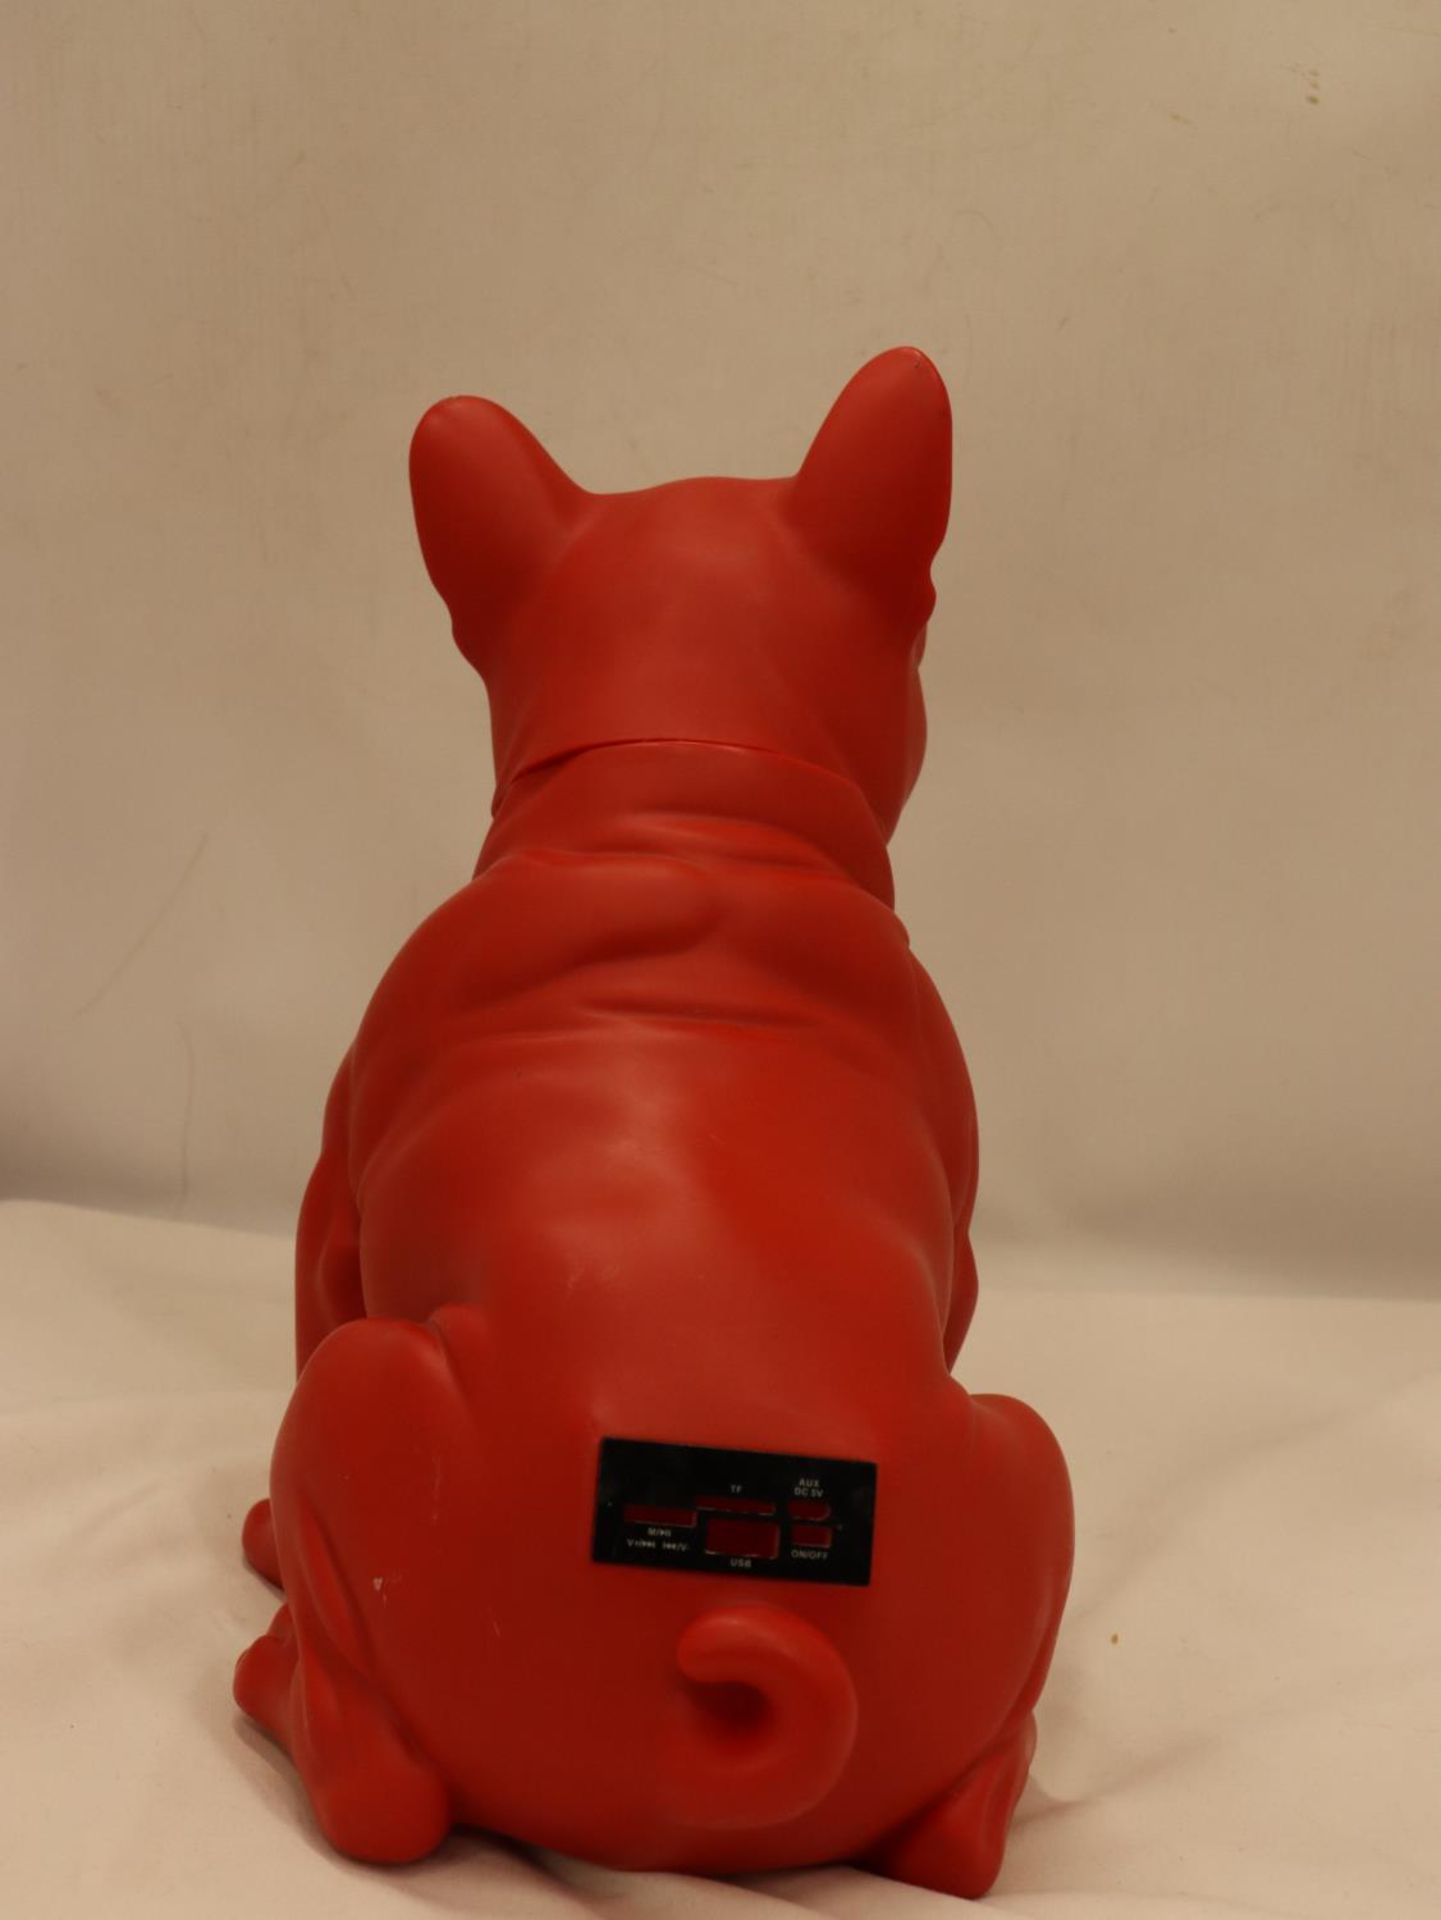 A LARGE RED 'MR COOL' BULLDOG WITH SUNGLASSES, HEIGHT 30CM - Image 4 of 4